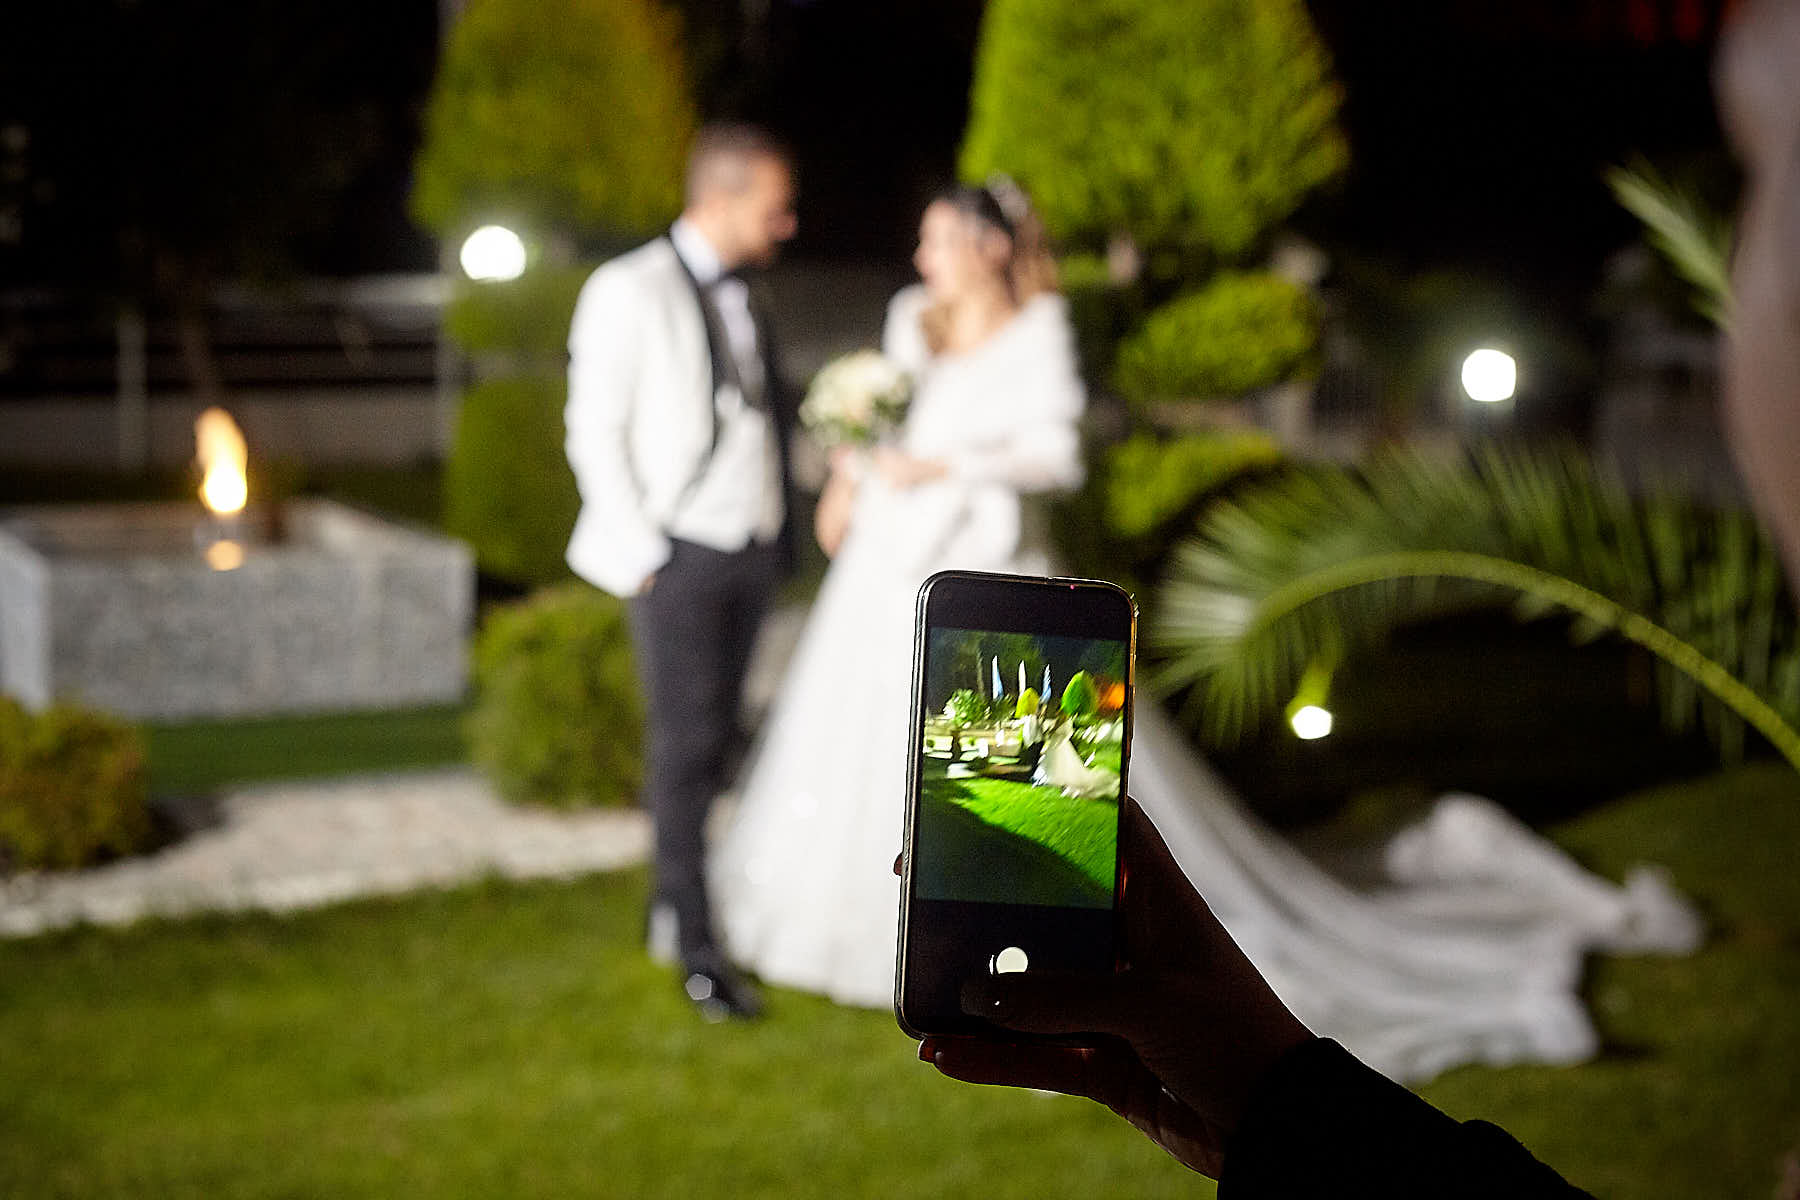 groom and bride at the background, smart phone screen capturing this moment